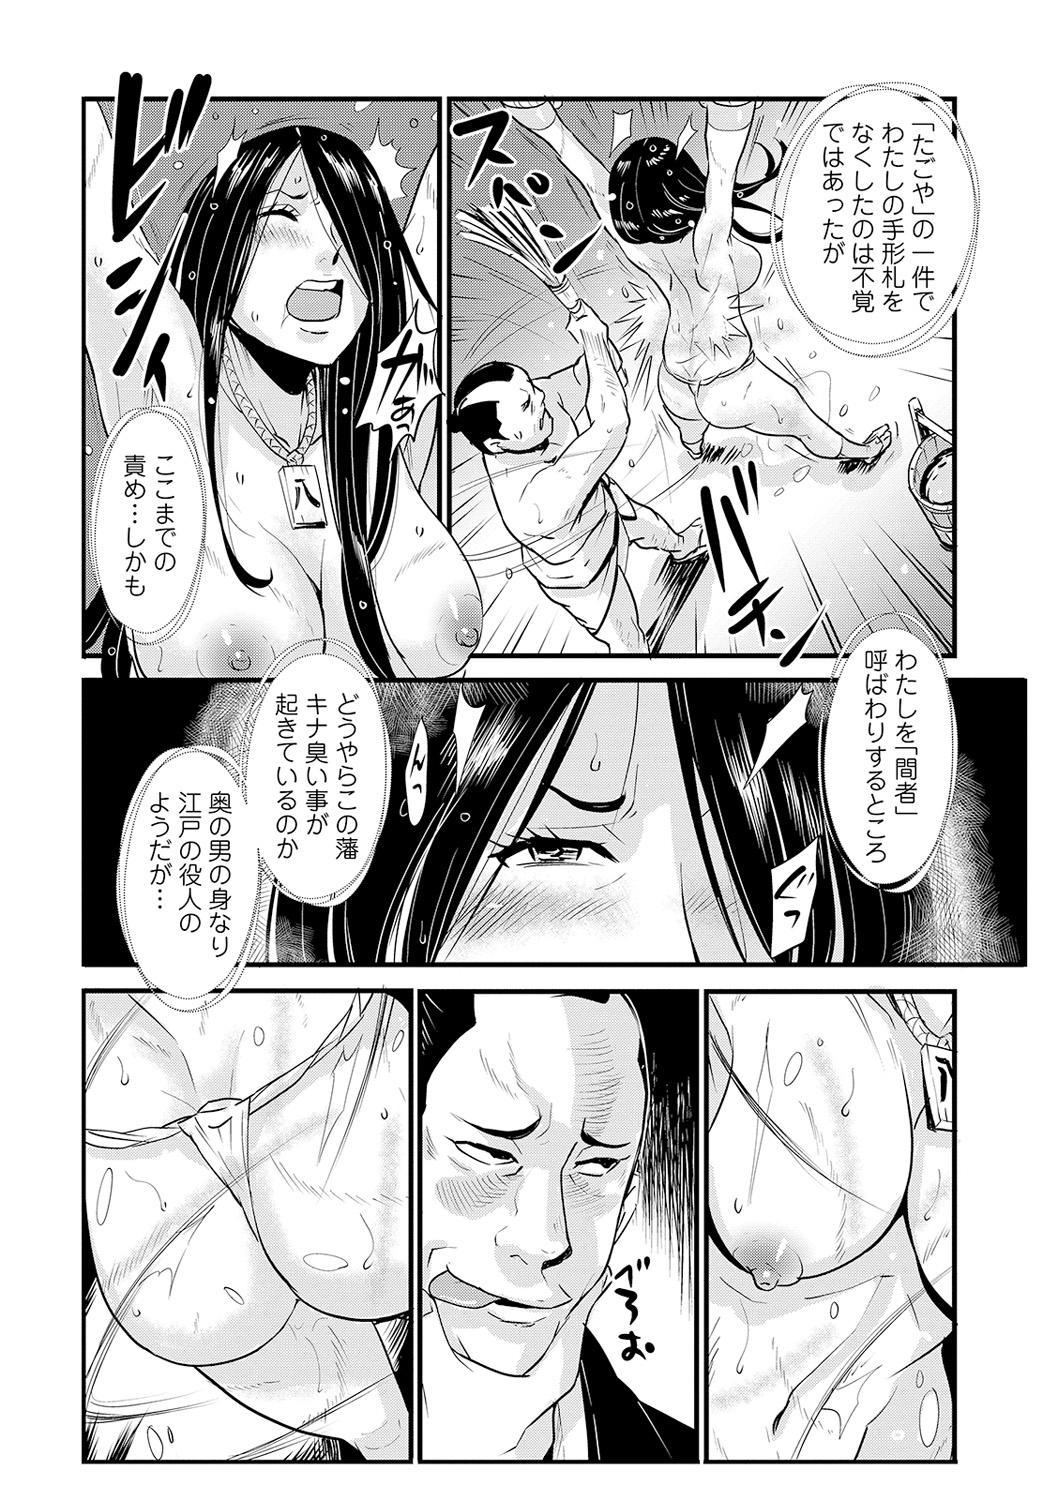 Couch Harami samurai 09 Wife - Page 8